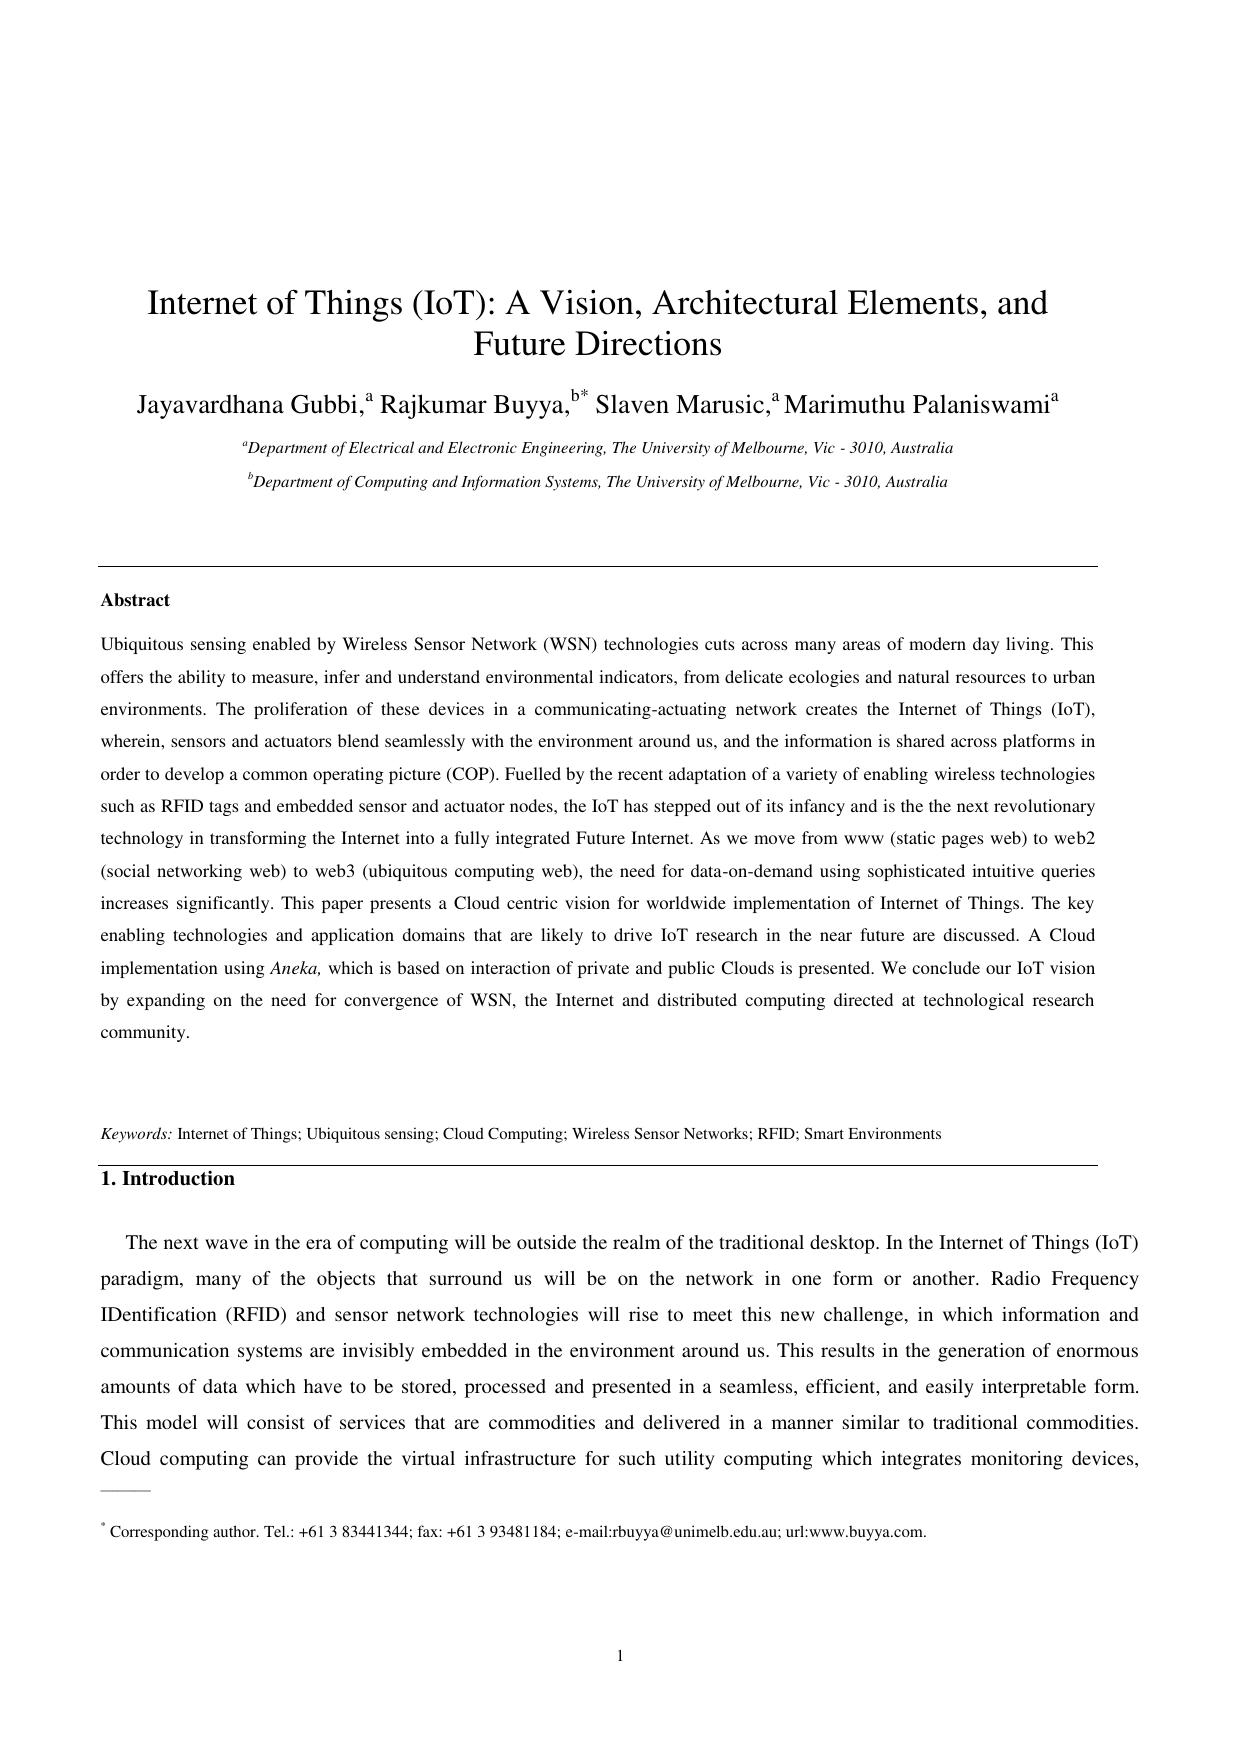 Internet of Things (IoT): A Vision, Archtectural Elements, and Future Directions - Article